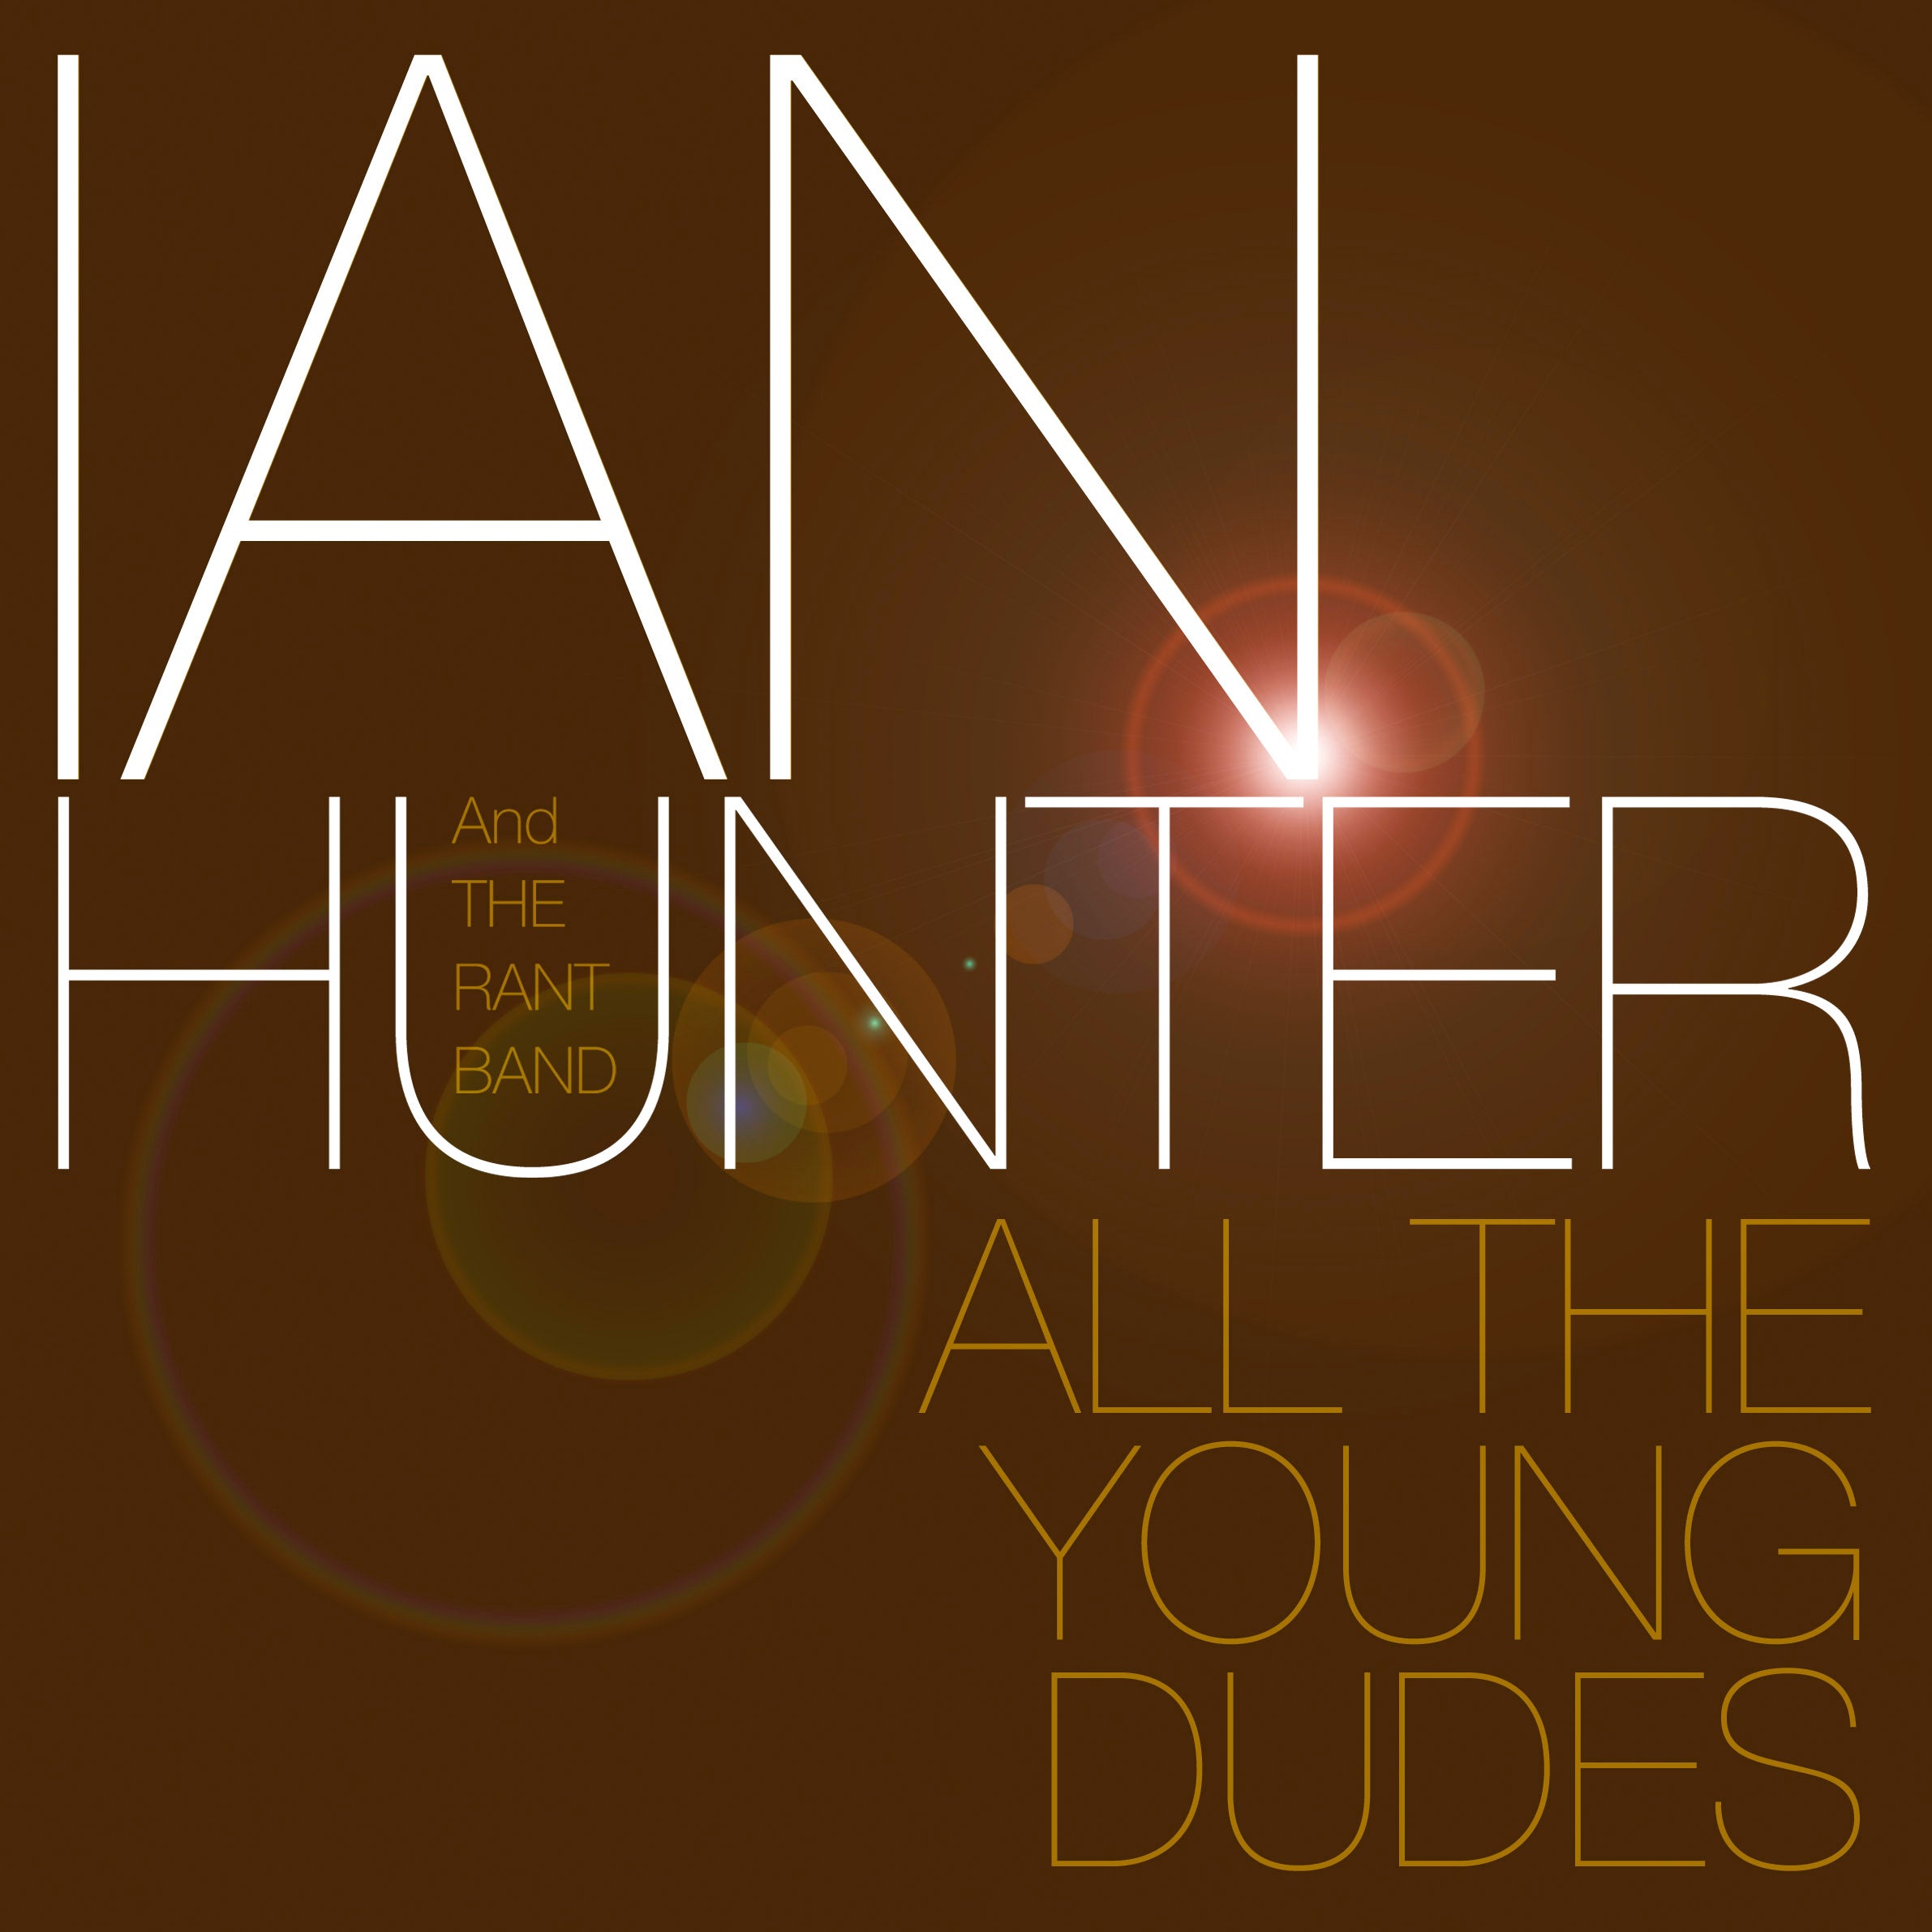 Ian Hunter - All The Young Dudes - 2CD Album - Secret Records Limited